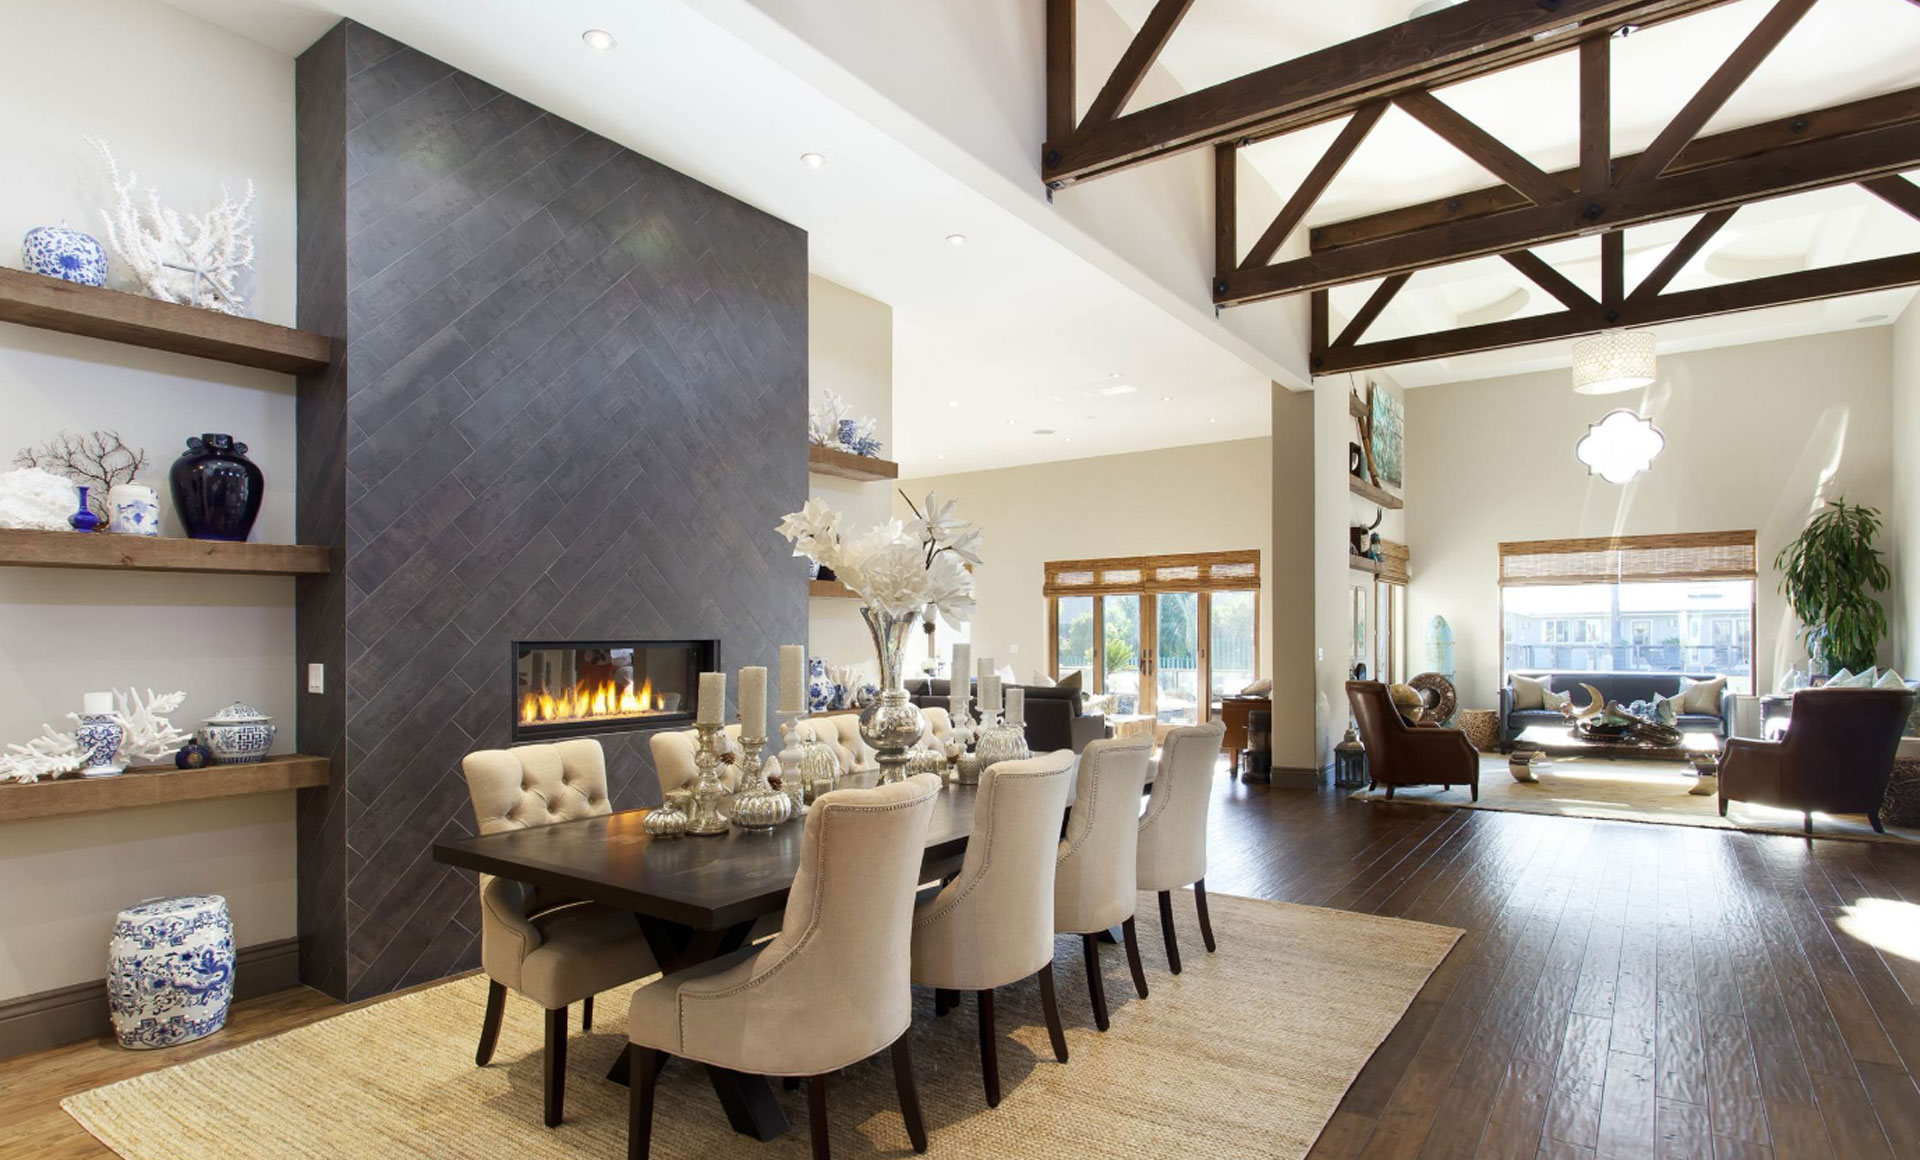 Fireplace Fundamentals: 13 Fireplace Ideas To Spark Up Your Home